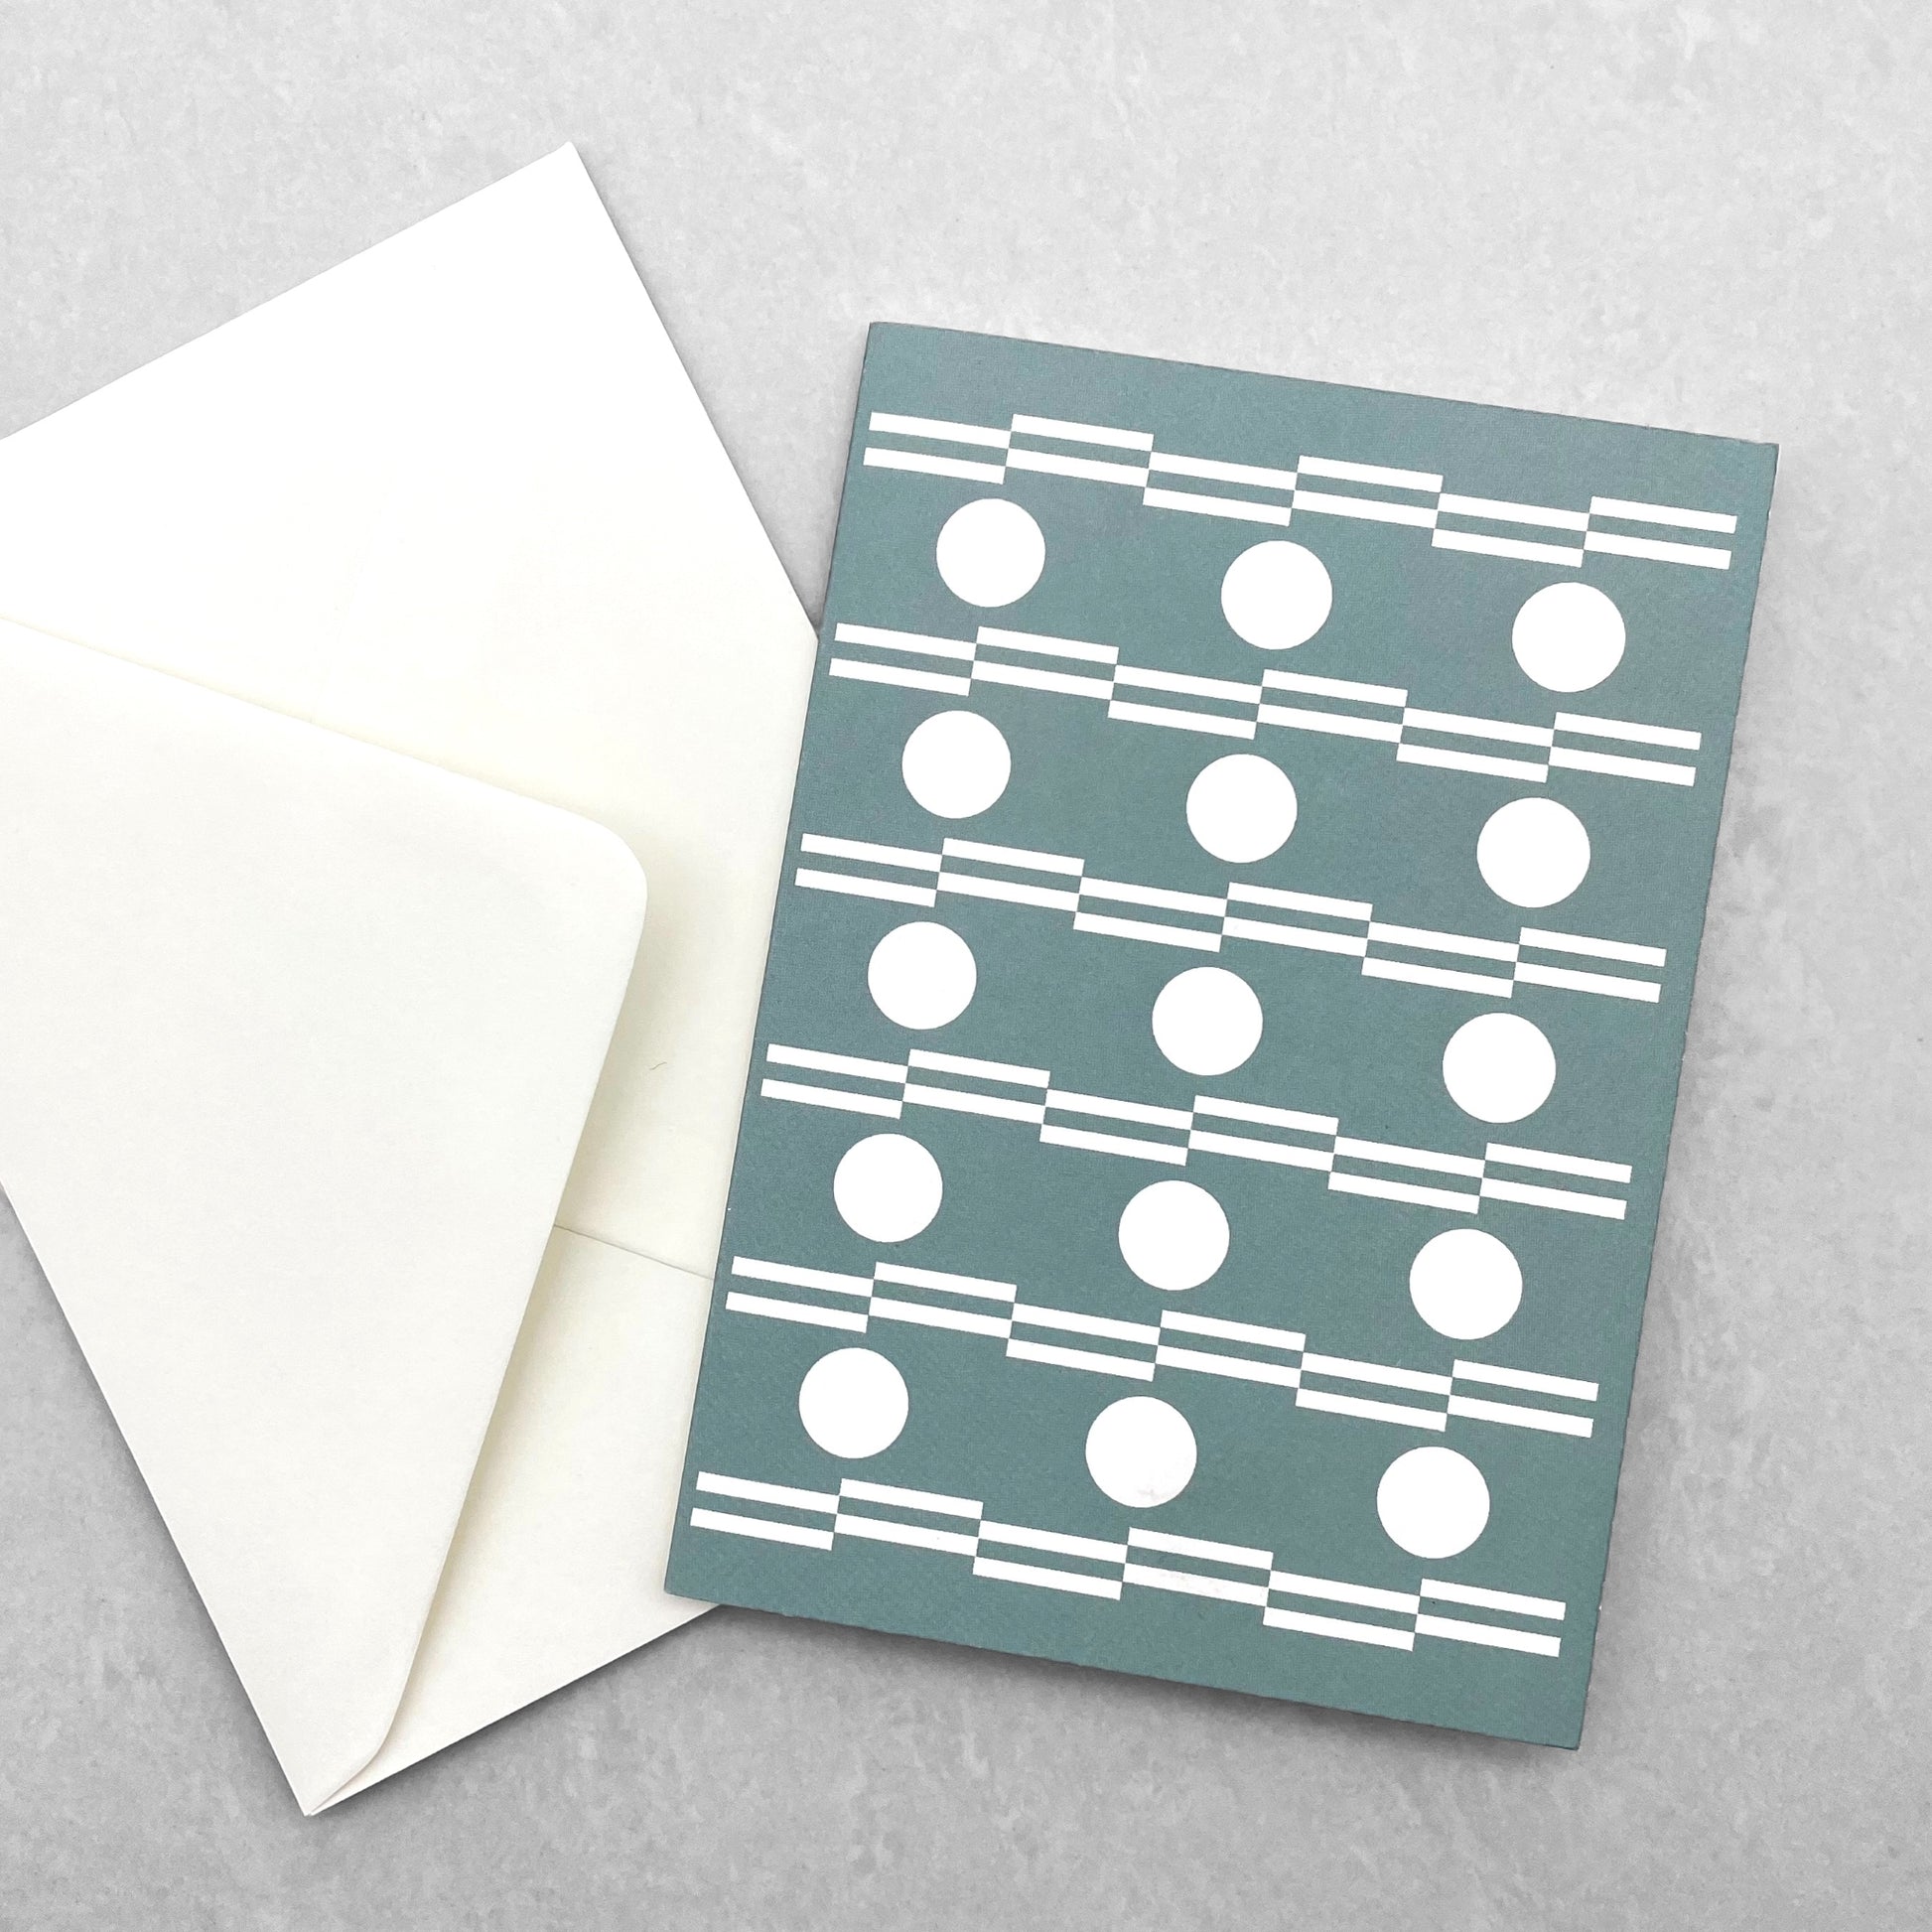 greetings card with abstract circle design in white and teal by Ola Studio